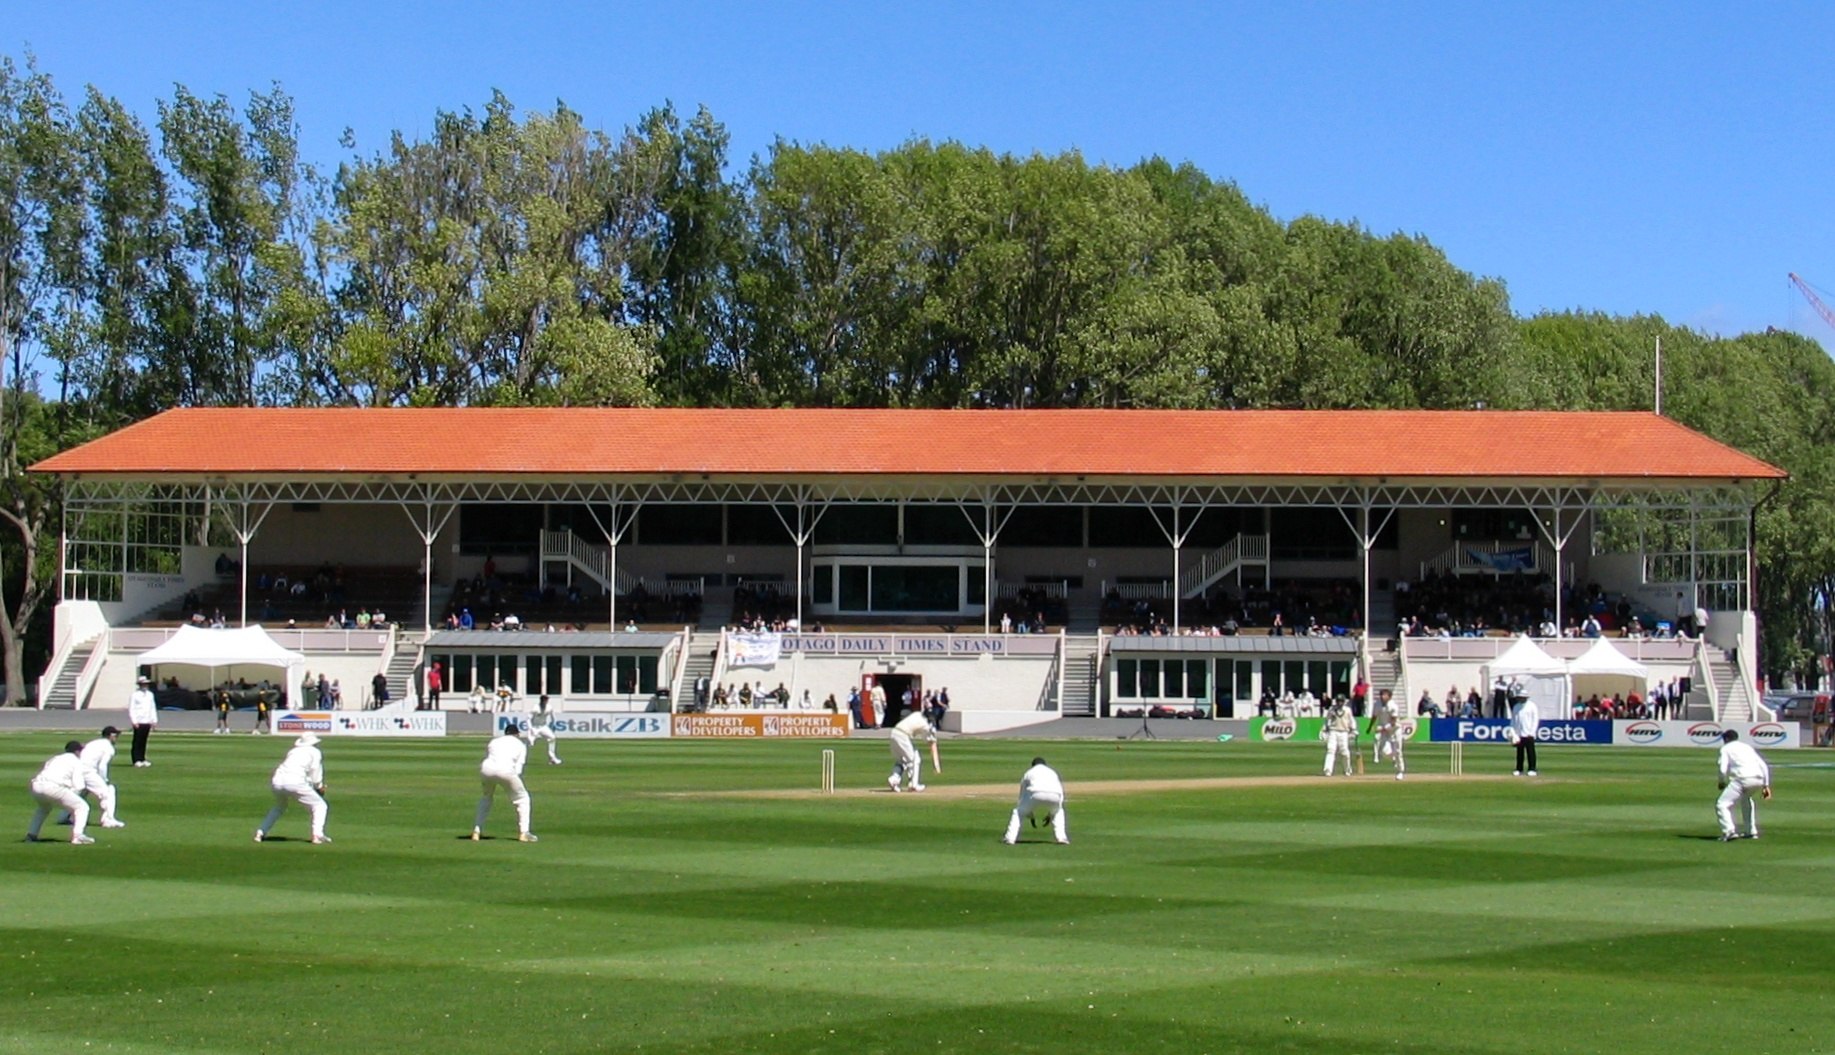 A match played in New Zealand (representational image). Image Credit: Wiki/Commons